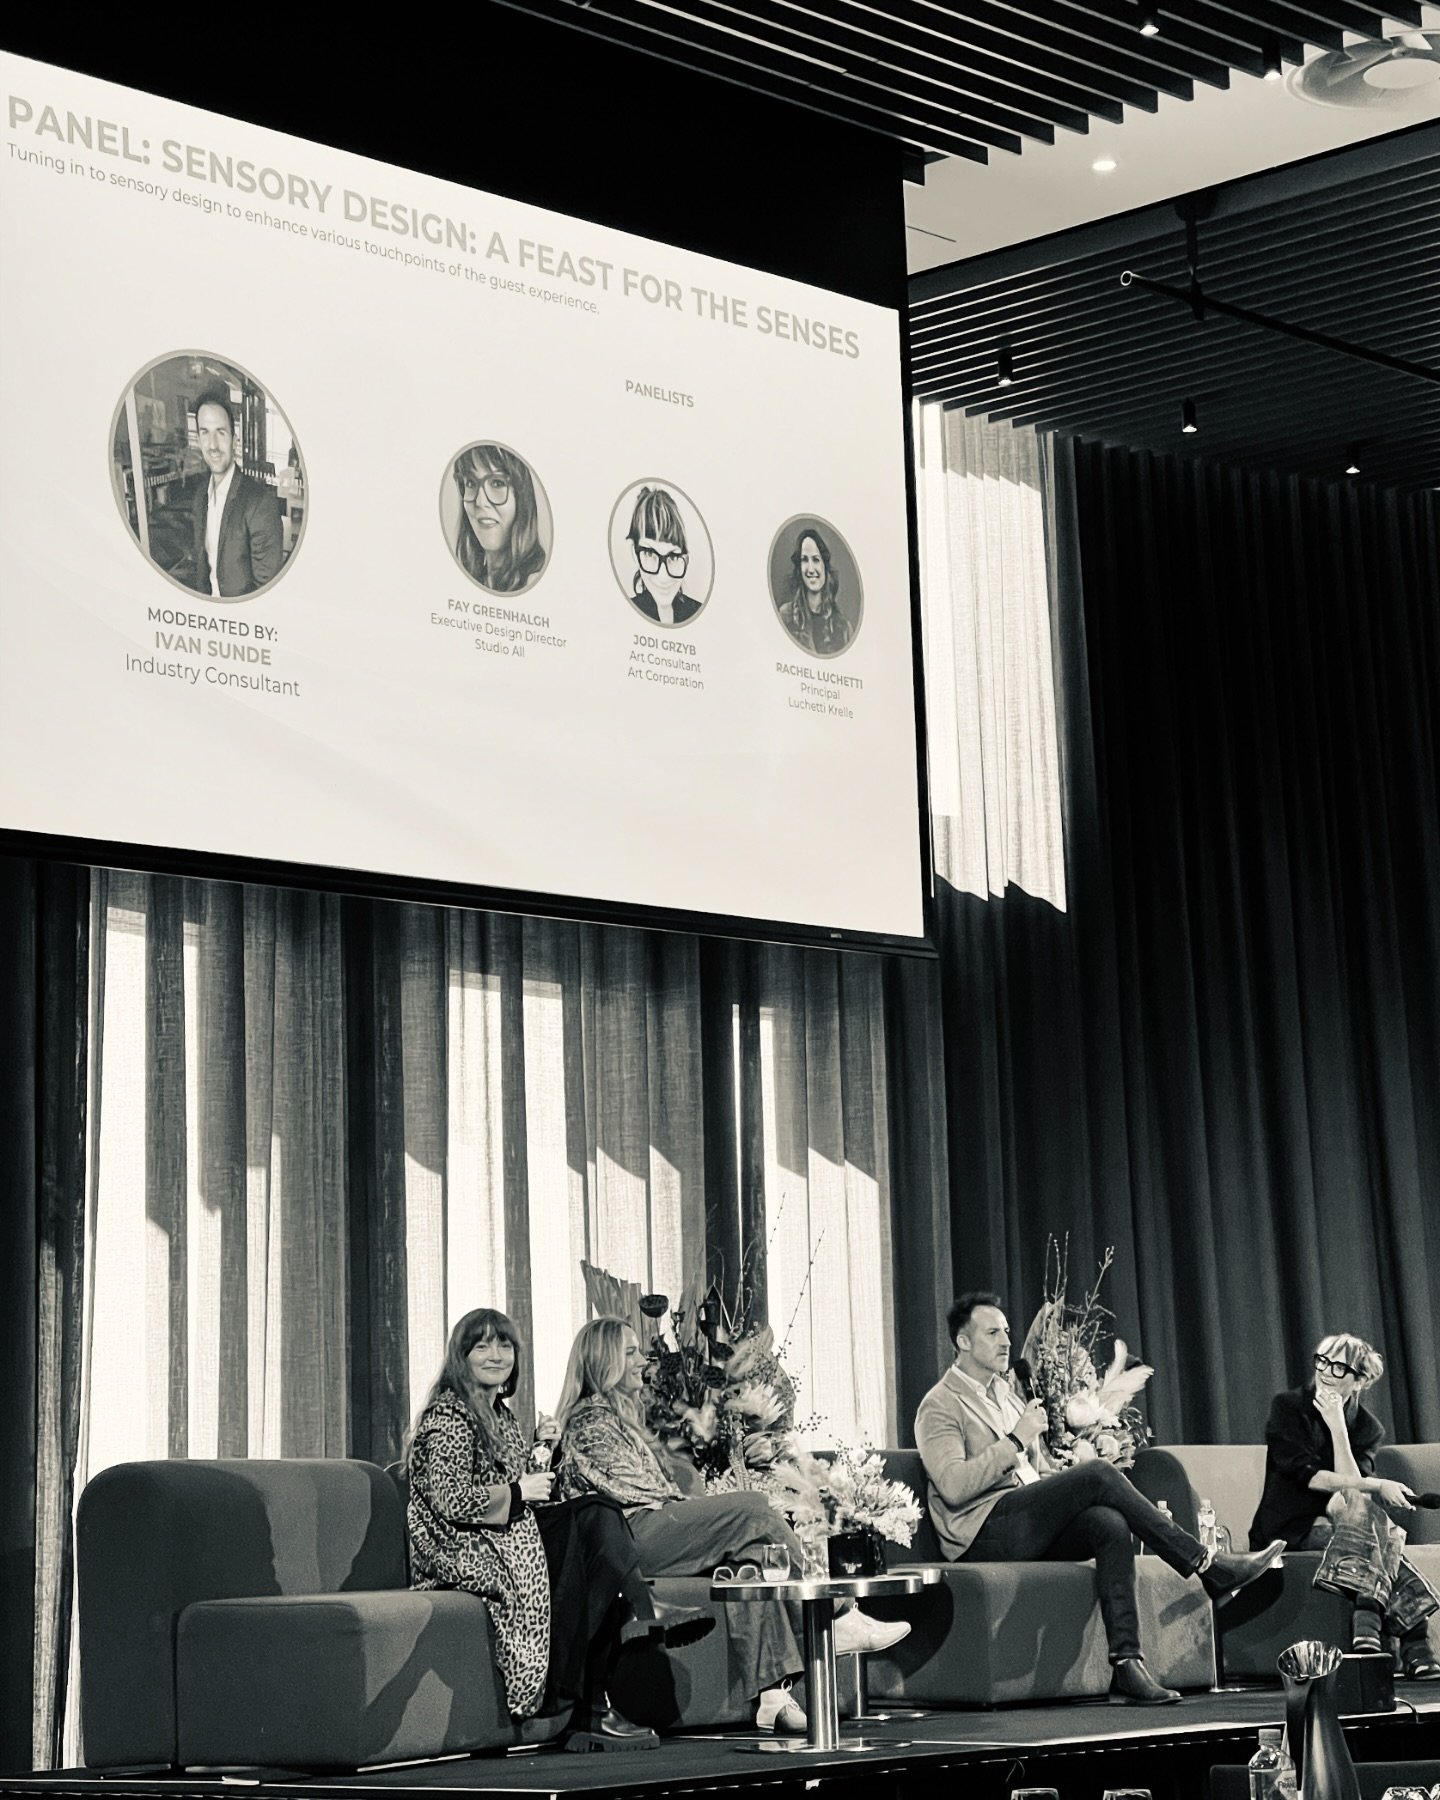 Design &amp; art leaders Illuminate Sensory Excellence in Hotel &amp; Hospitality design at Adelaide&rsquo;s Design Inn conference: Rachel Luchetti, Jodi Grzyb, and Fay Greenhalgh Lead Dynamic Panel Discussion*

In a captivating showcase, design lumi